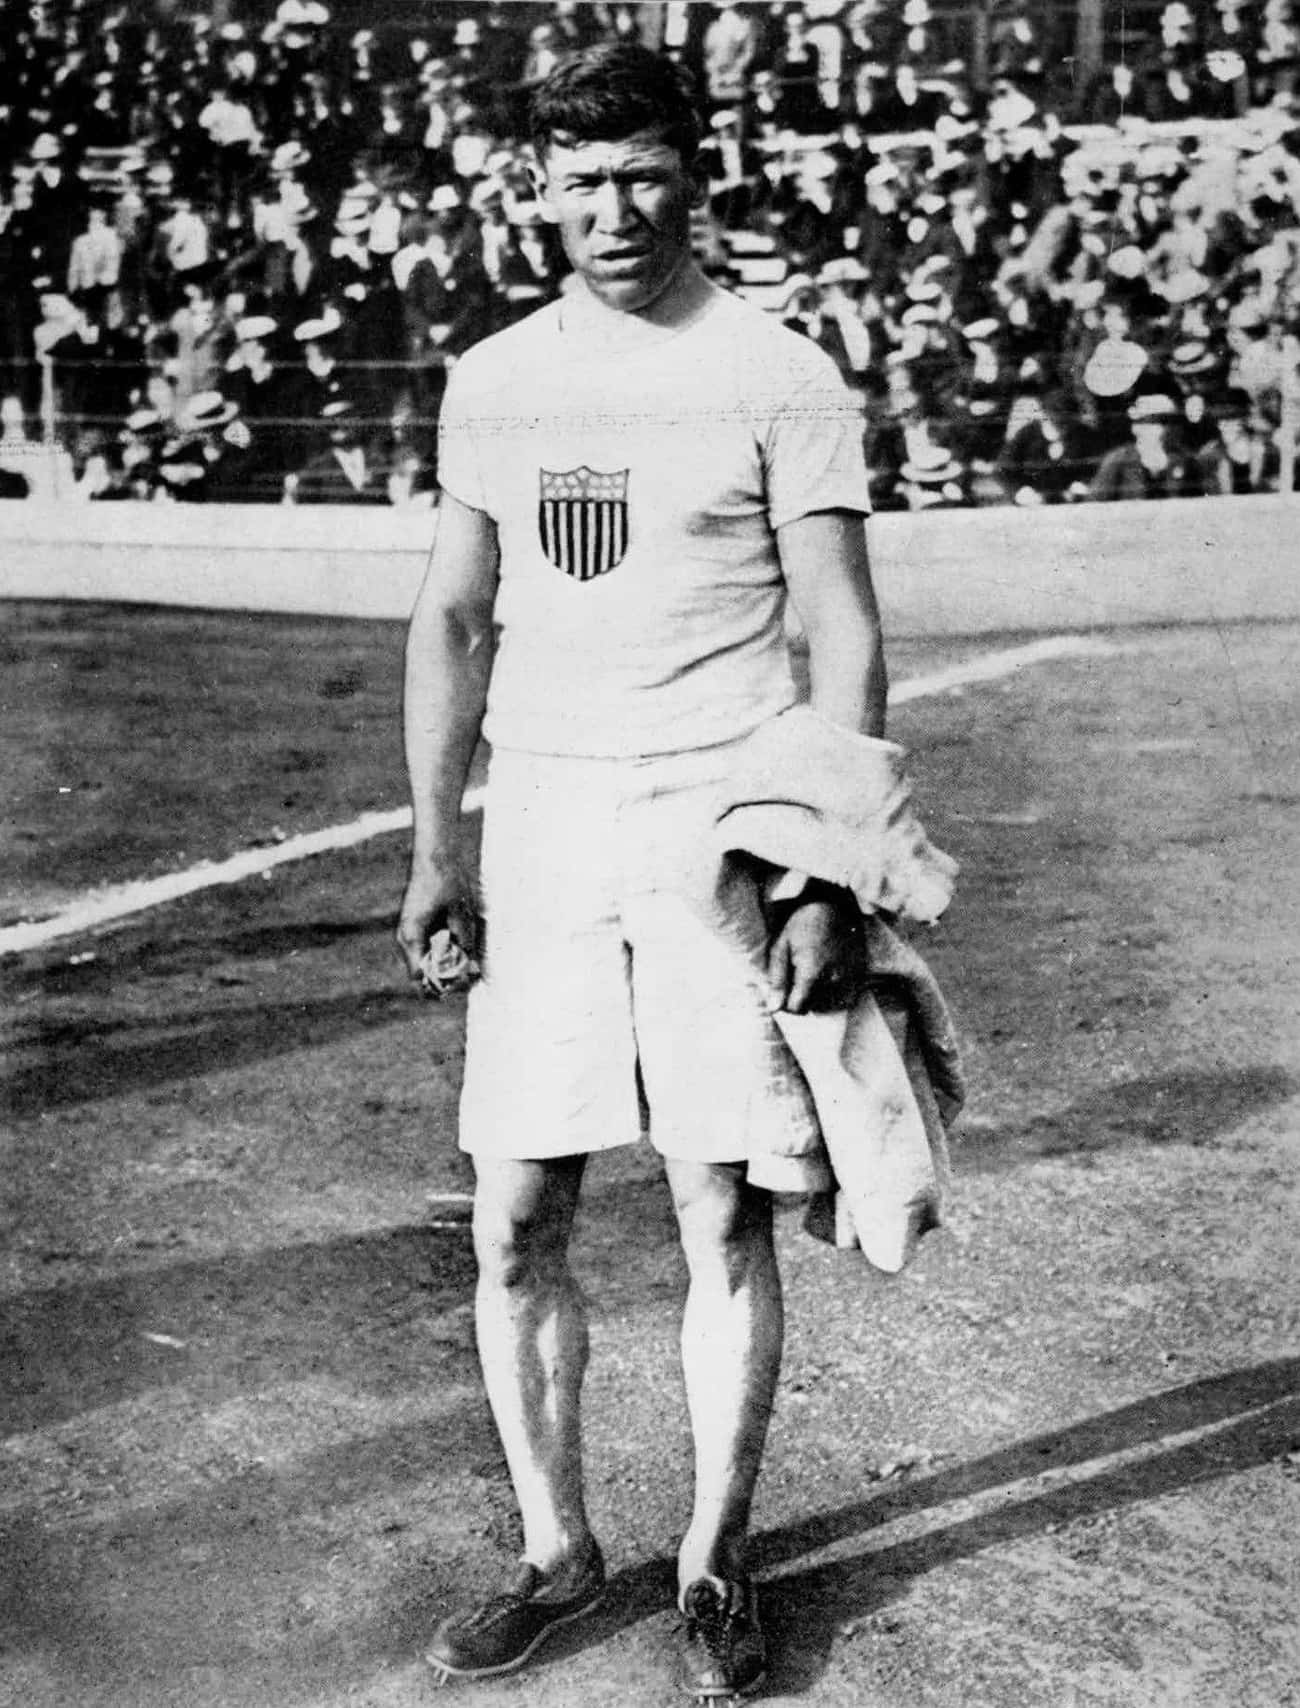 Thorpe Won Gold Medals For The Pentathlon And The Decathlon At The 1912 Olympics